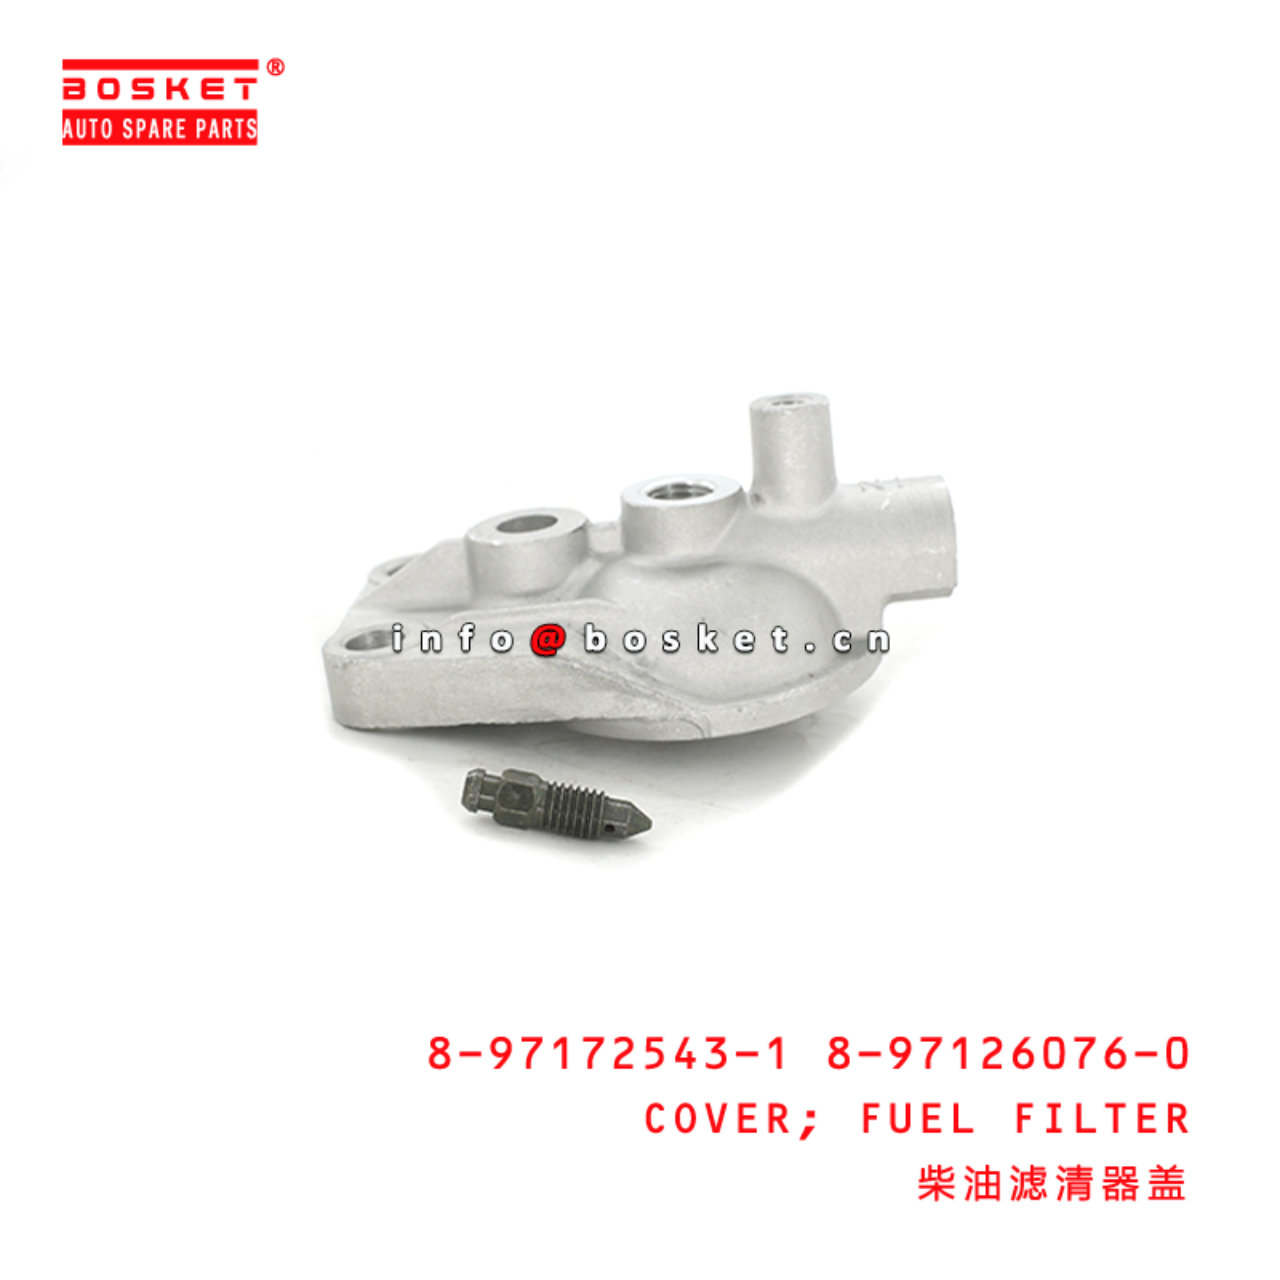 8-97172543-1 8-97126076-0 Fuel Filter Cover 8971725431 8971260760 Suitable for ISUZU NKR 4HG1